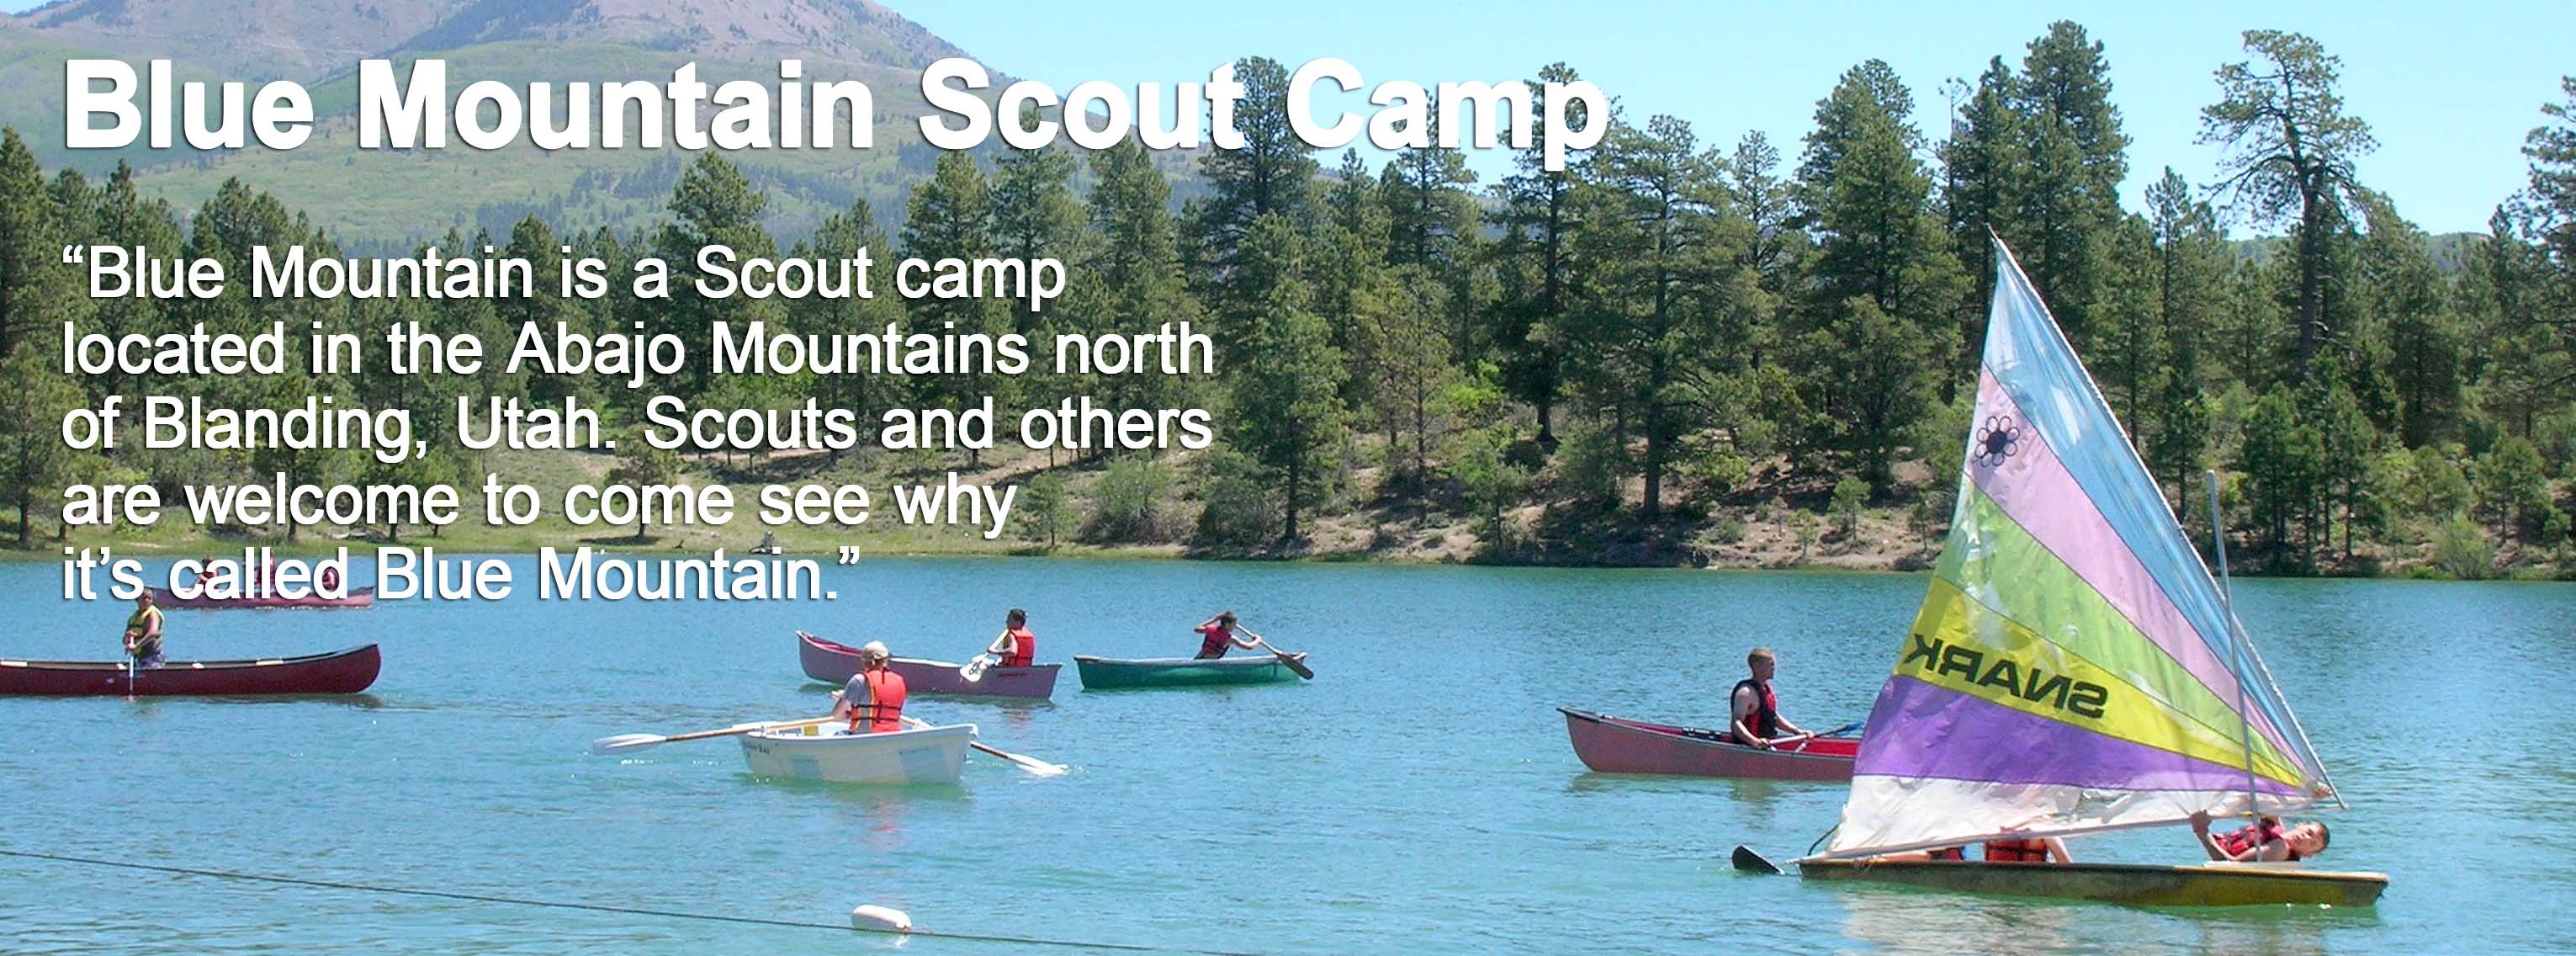 2018 Blue Mountain Scout Camp is Currently Full.